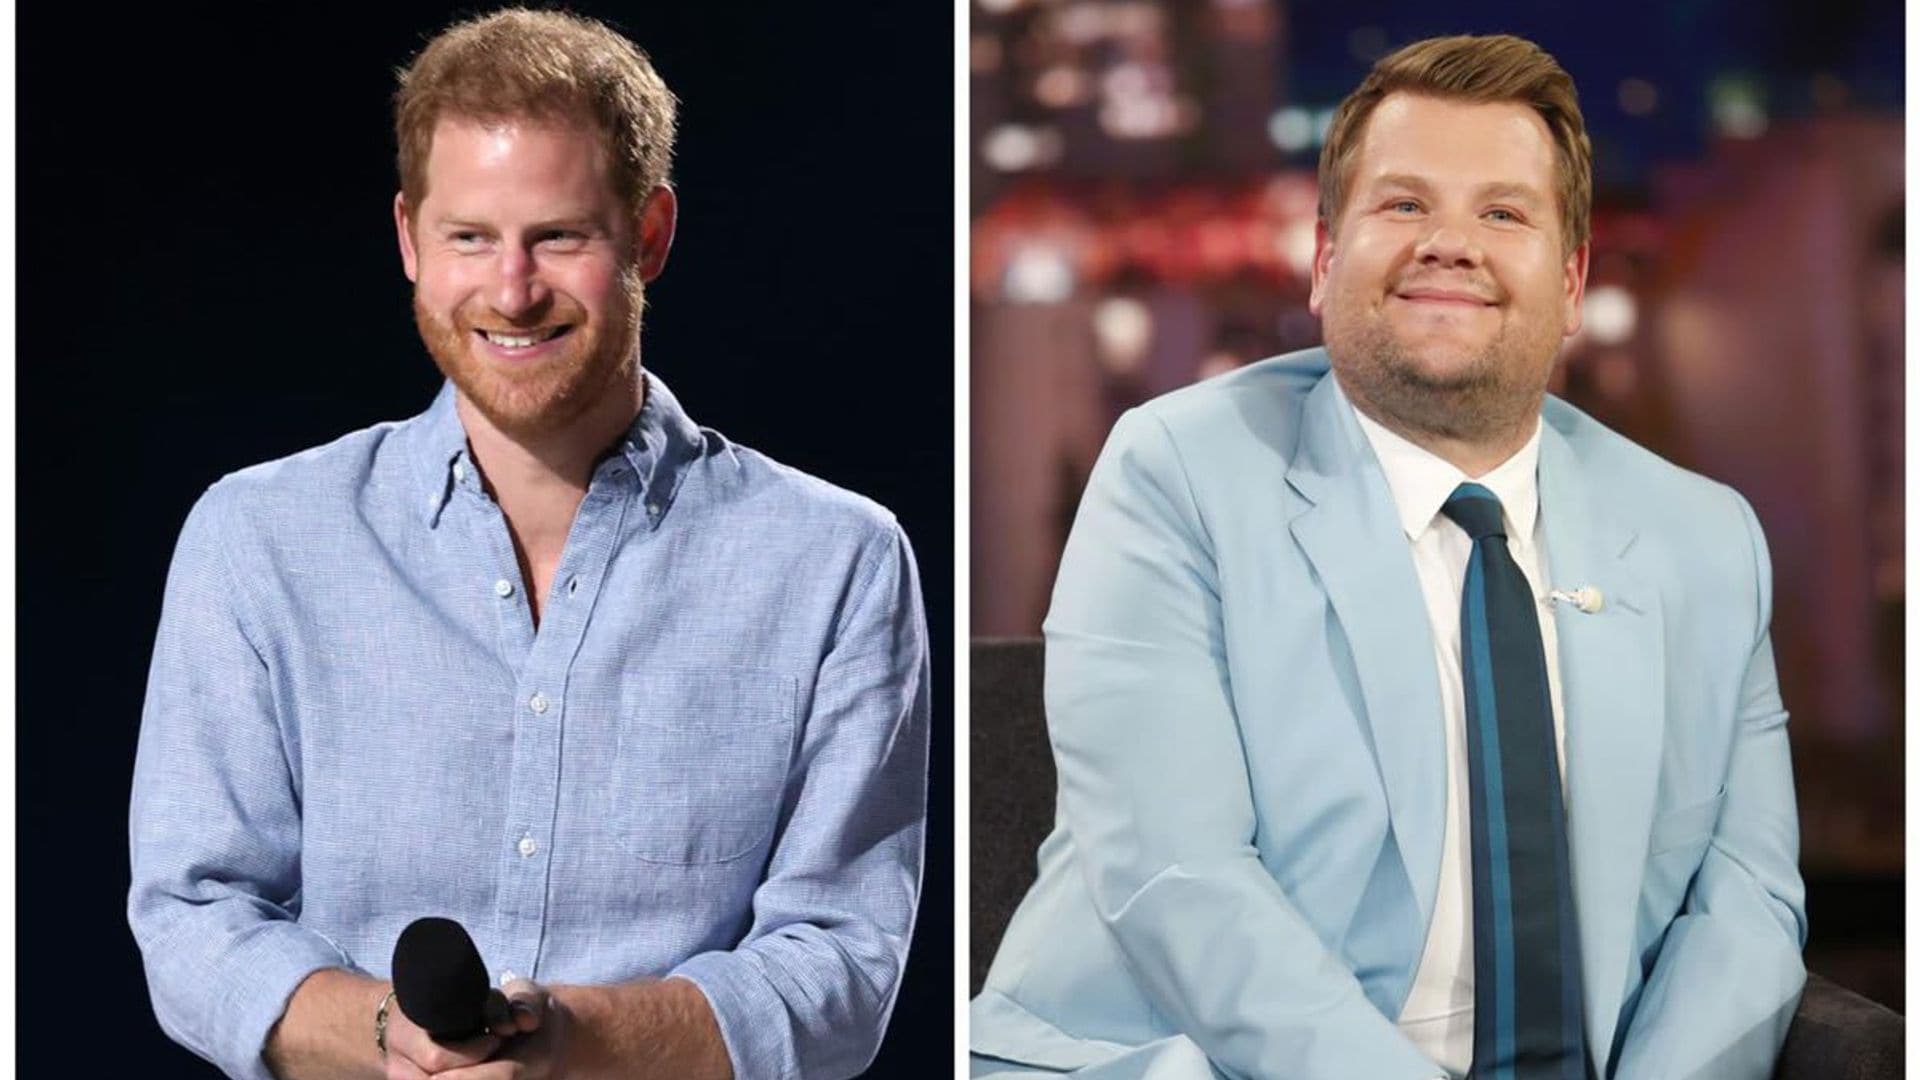 James Corden is proud to show Prince Harry’s authentic self